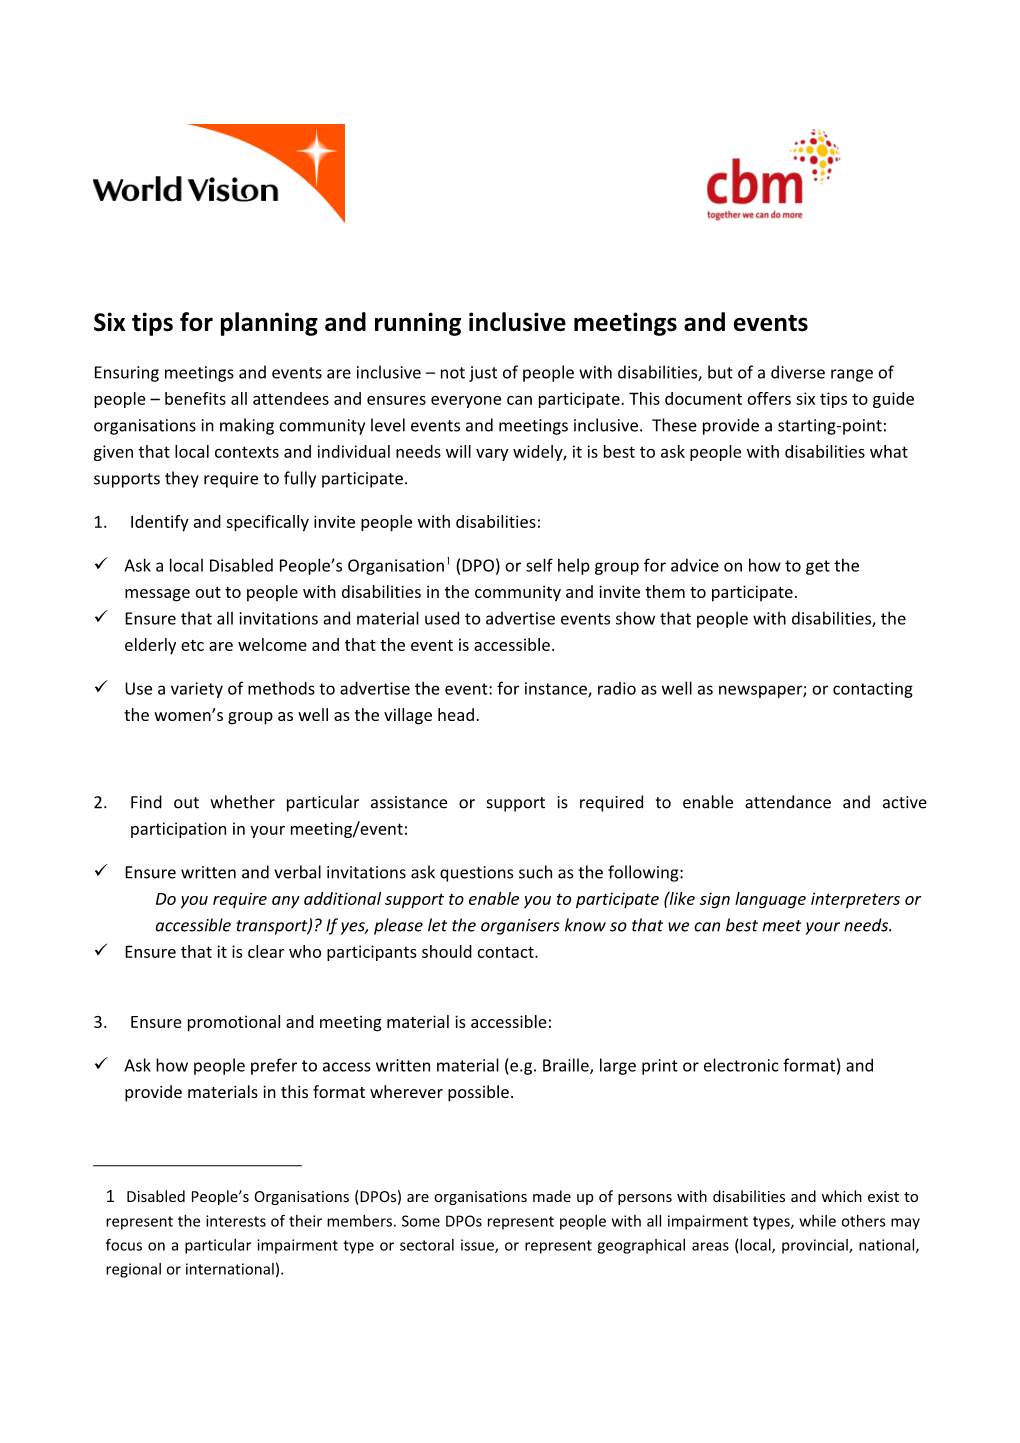 Six Tips for Planning and Running Inclusive Meetings and Events